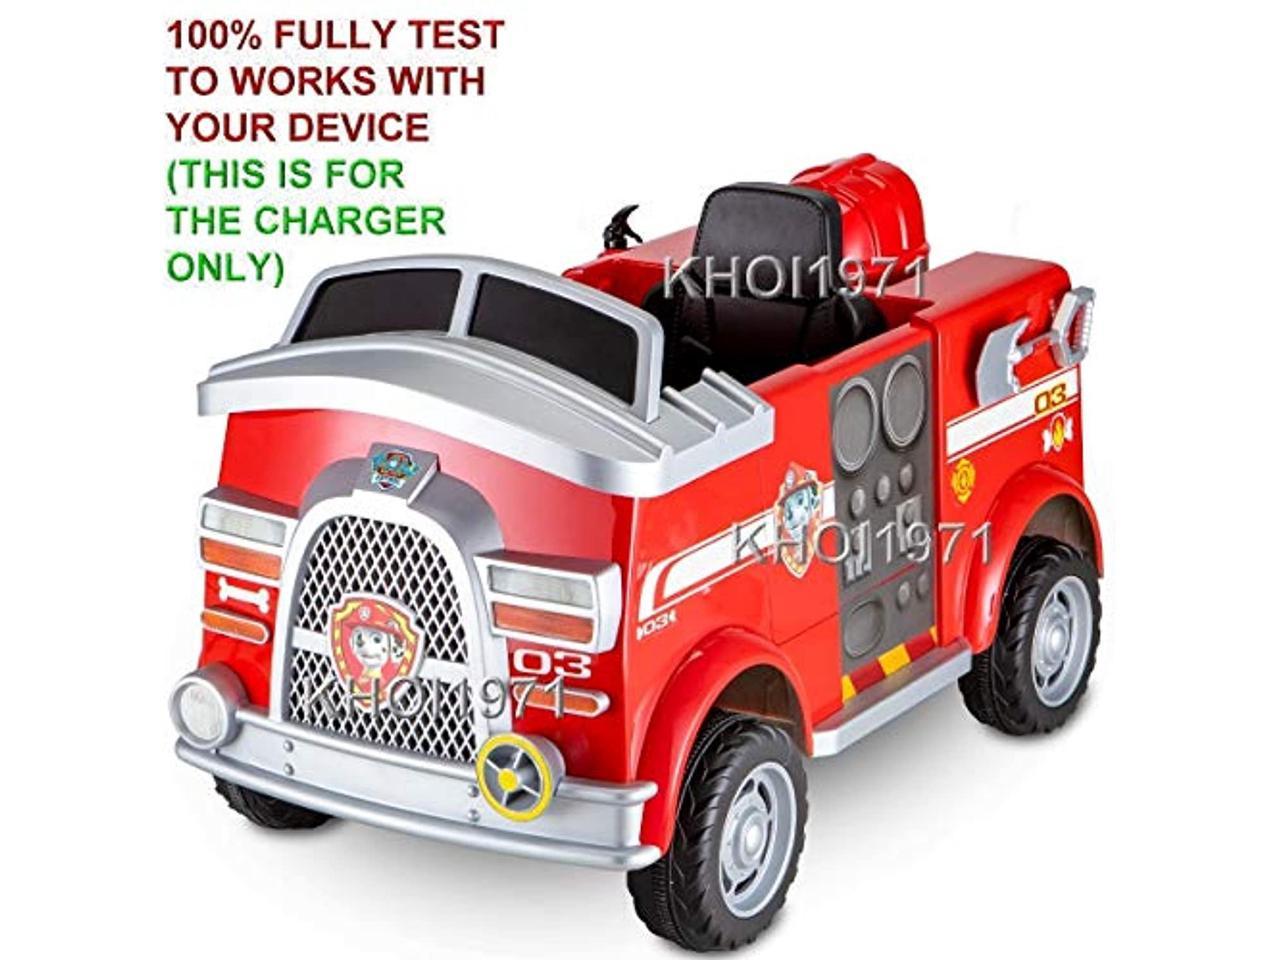 8-FT WALL charger AC adapter FOR KT1439WM KIDTRAX Paw Patrol MARSHALL Fire Truck 